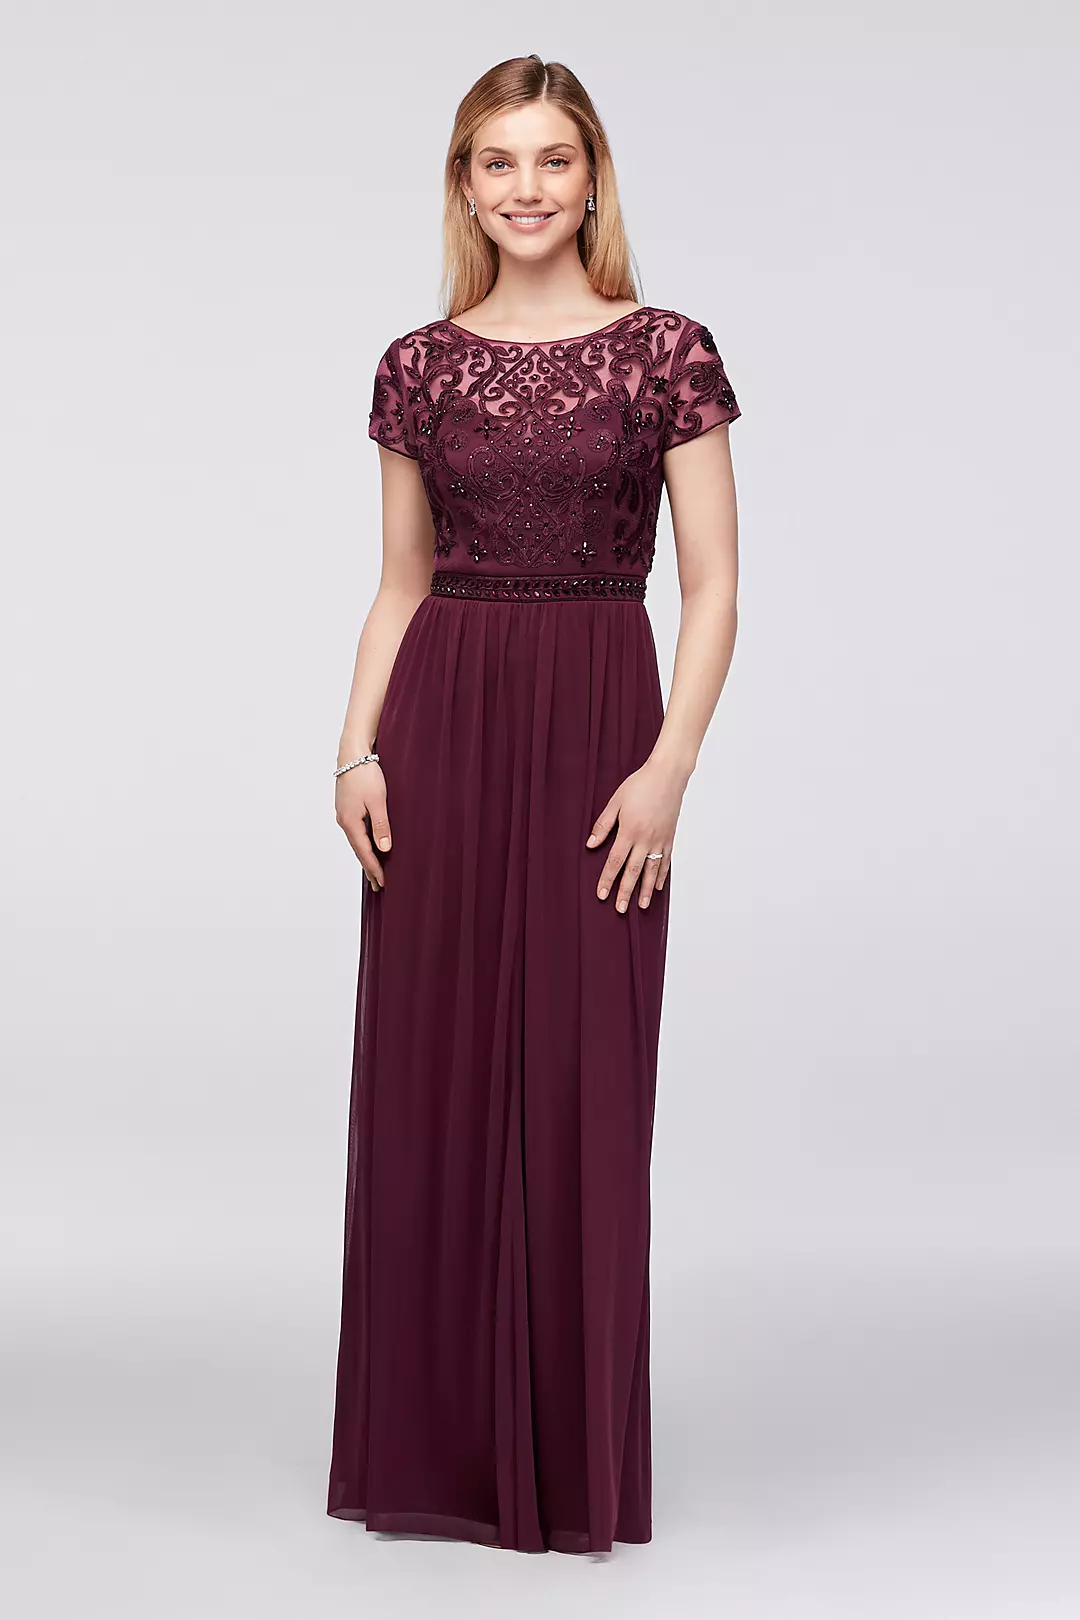 Crystal-Embellished Cap-Sleeve Chiffon Gown Image